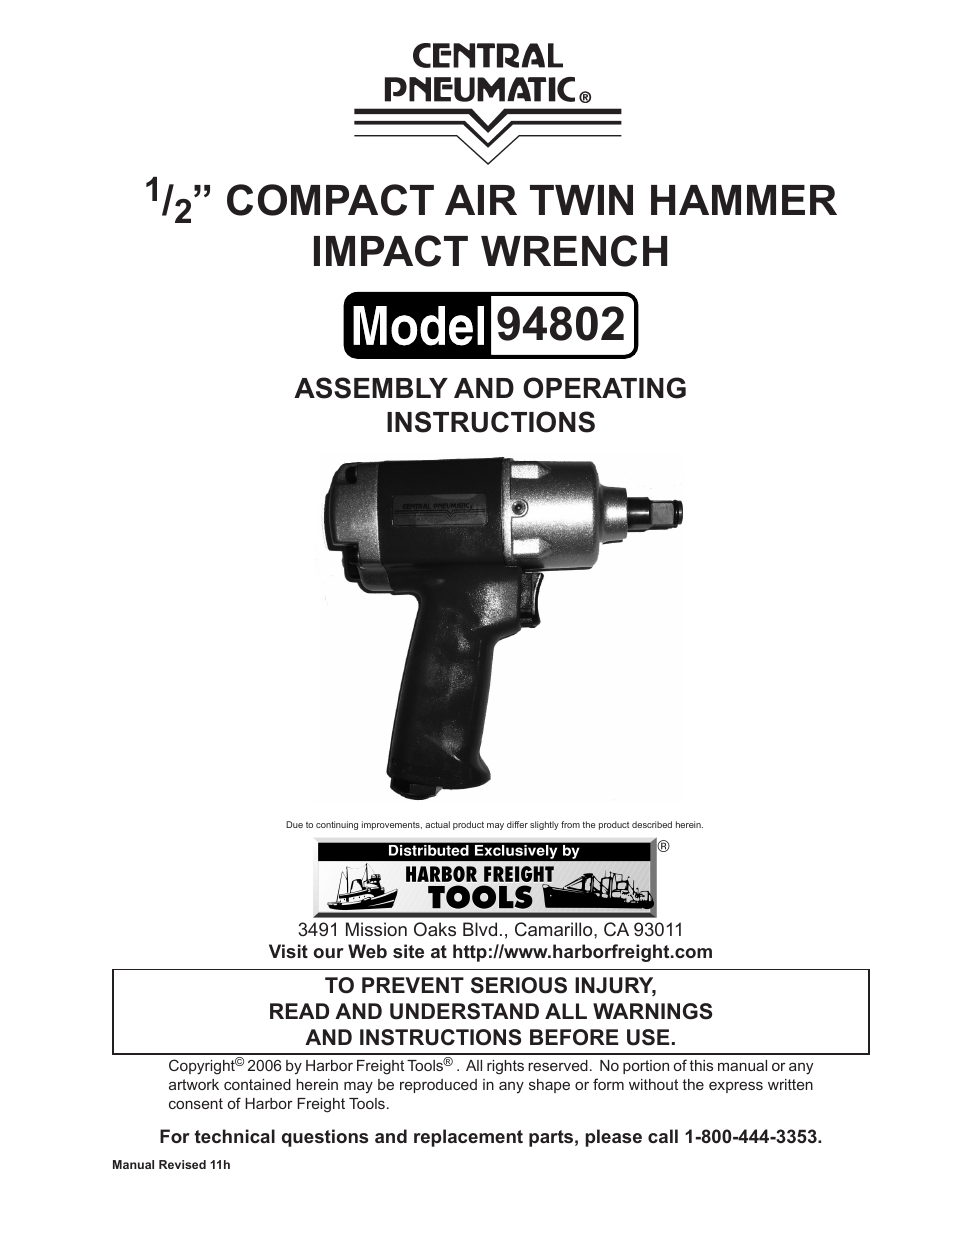 1/2" Compact Air Twin Hammer Impact Wrench 94802